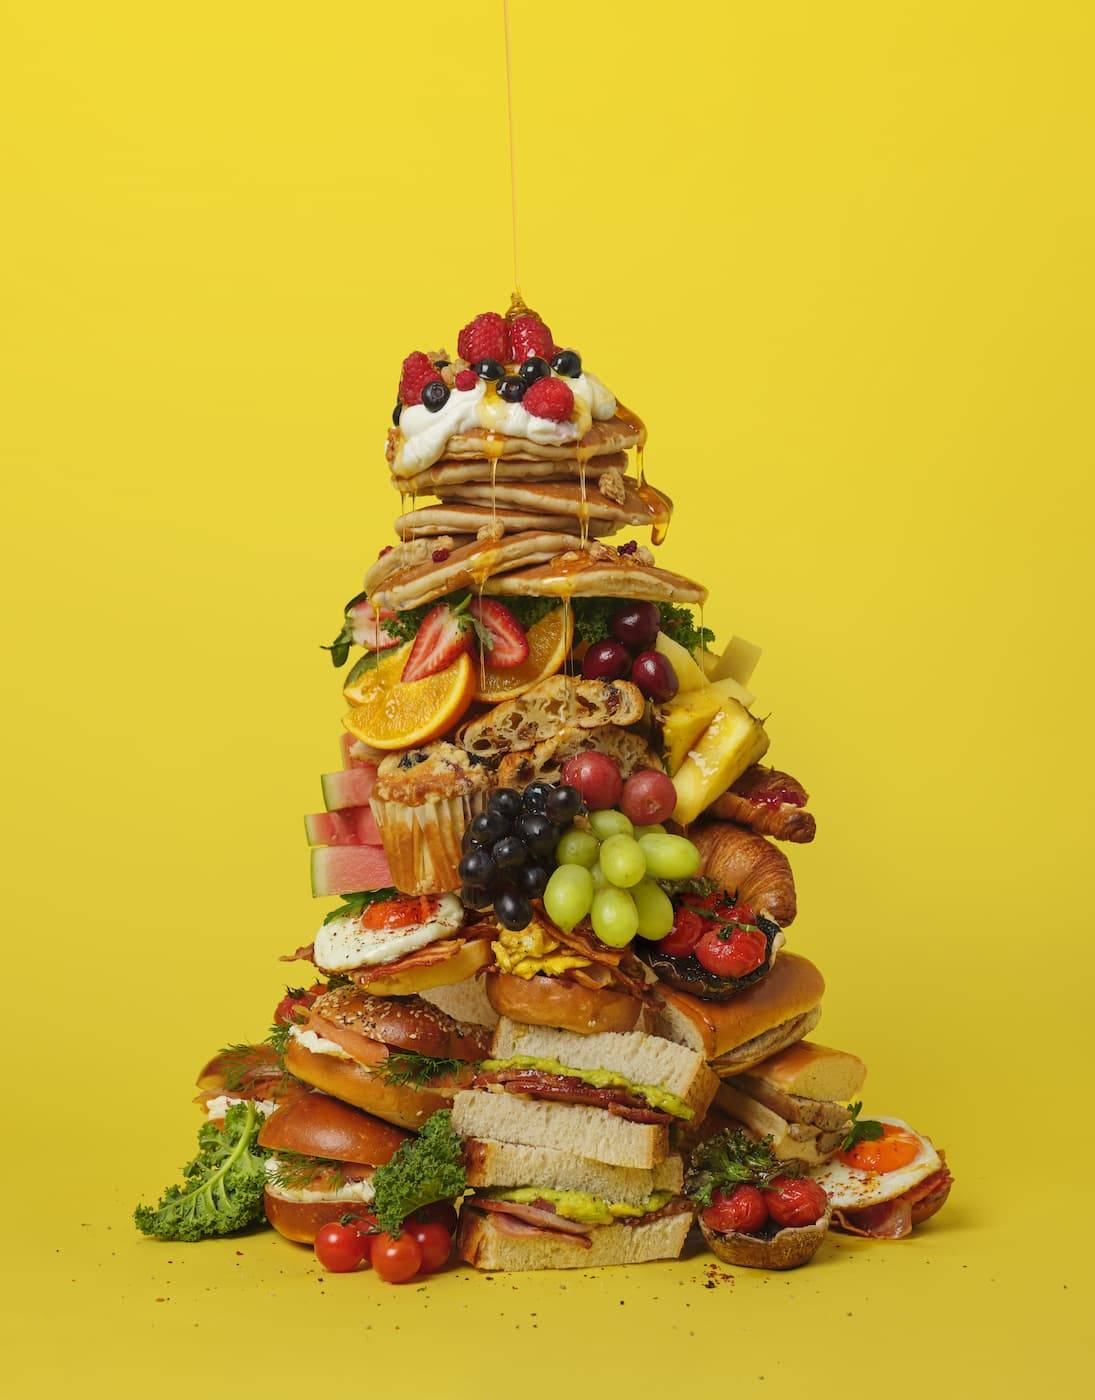 A huge pile of food is stacked up against a yellow isolated background. We see sandwiches, pastries, fruit, pancakes, waffles, syrup etc